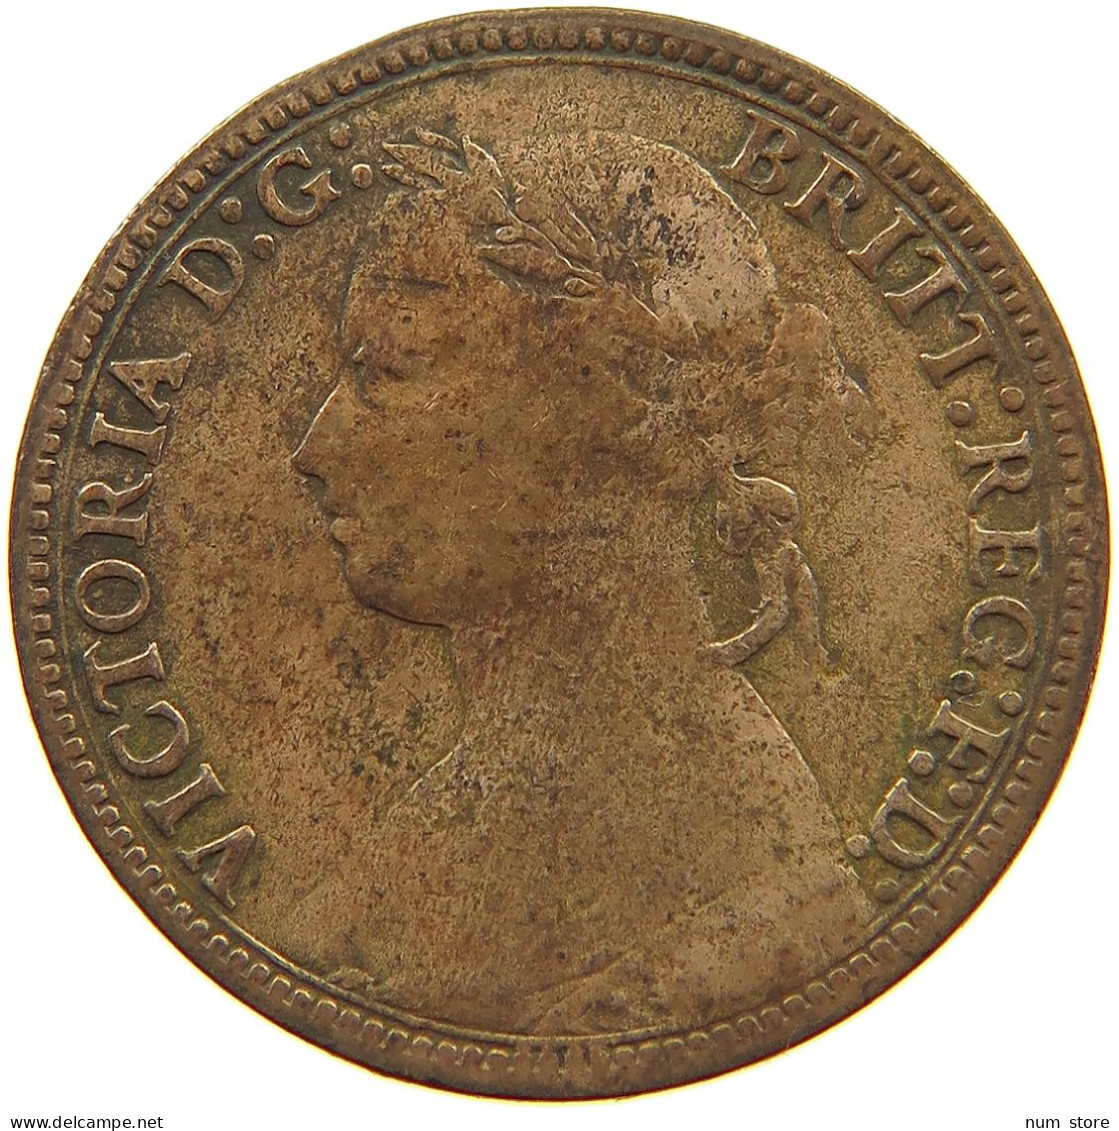 GREAT BRITAIN FARTHING 1878 Victoria 1837-1901 #a011 0809 - B. 1 Farthing